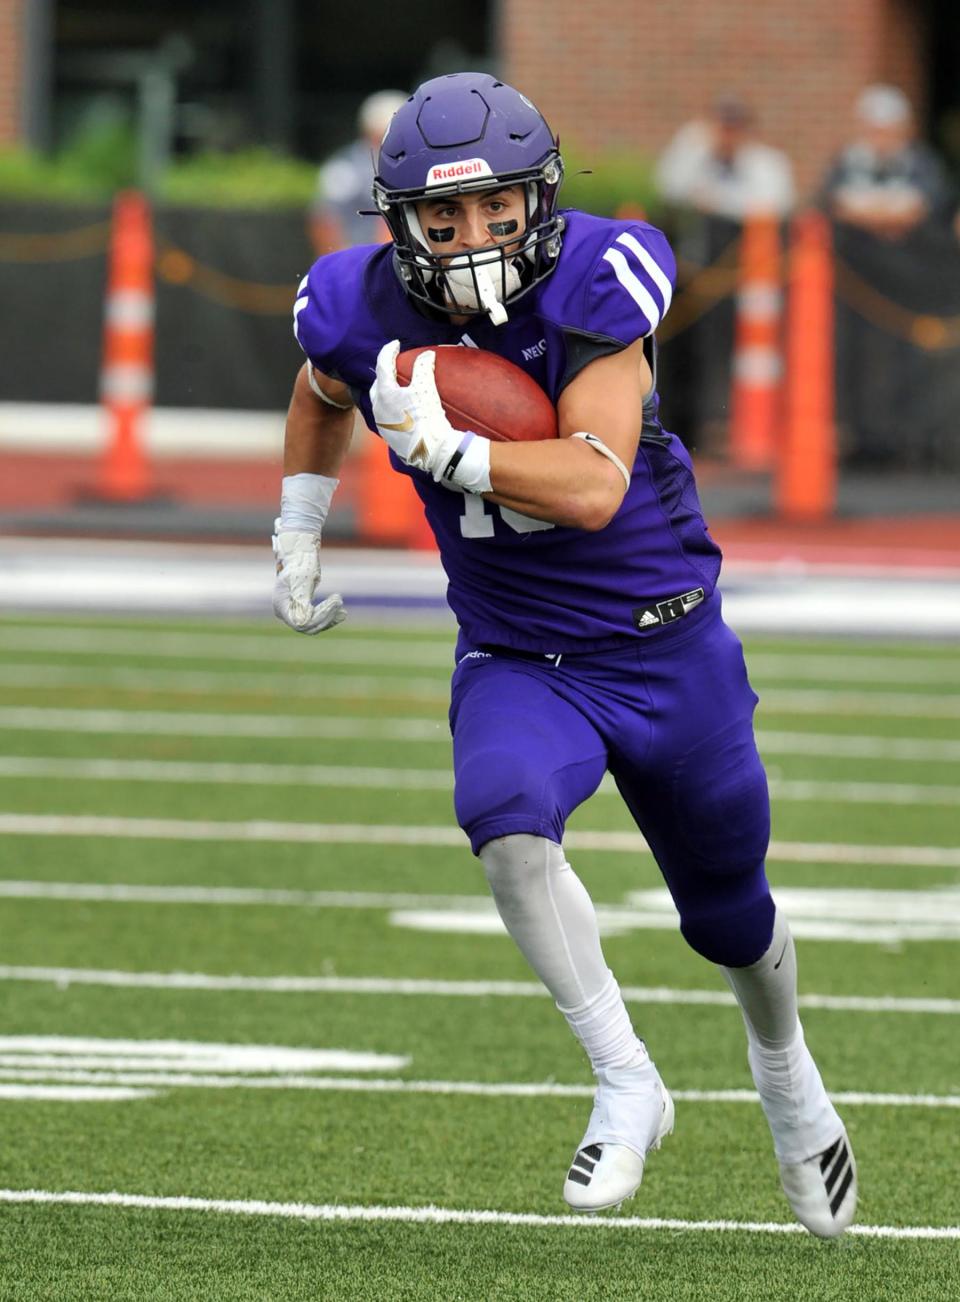 Andrew Jamiel graduated Dennis-Yarmouth in 2016, and went on to earn All-Northeast-10 Conference honors each of his four years. He graduated as the school's all-time leader in receiver yards and receptions per game, among other accolades.